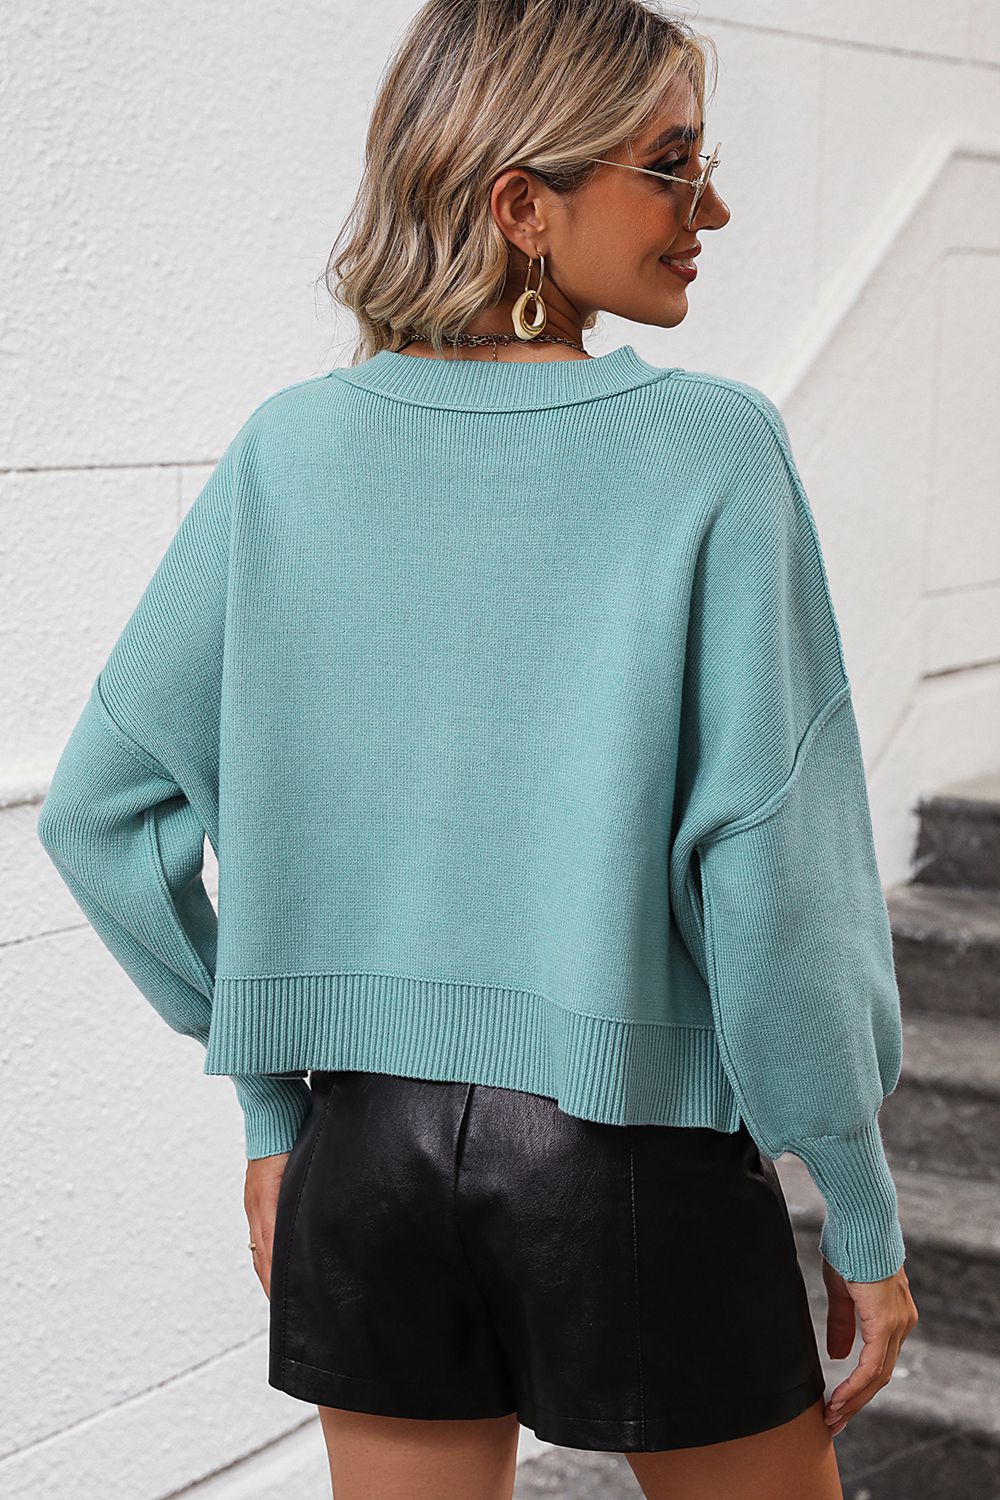 Round & Relaxed Dropped Shoulder Sweater